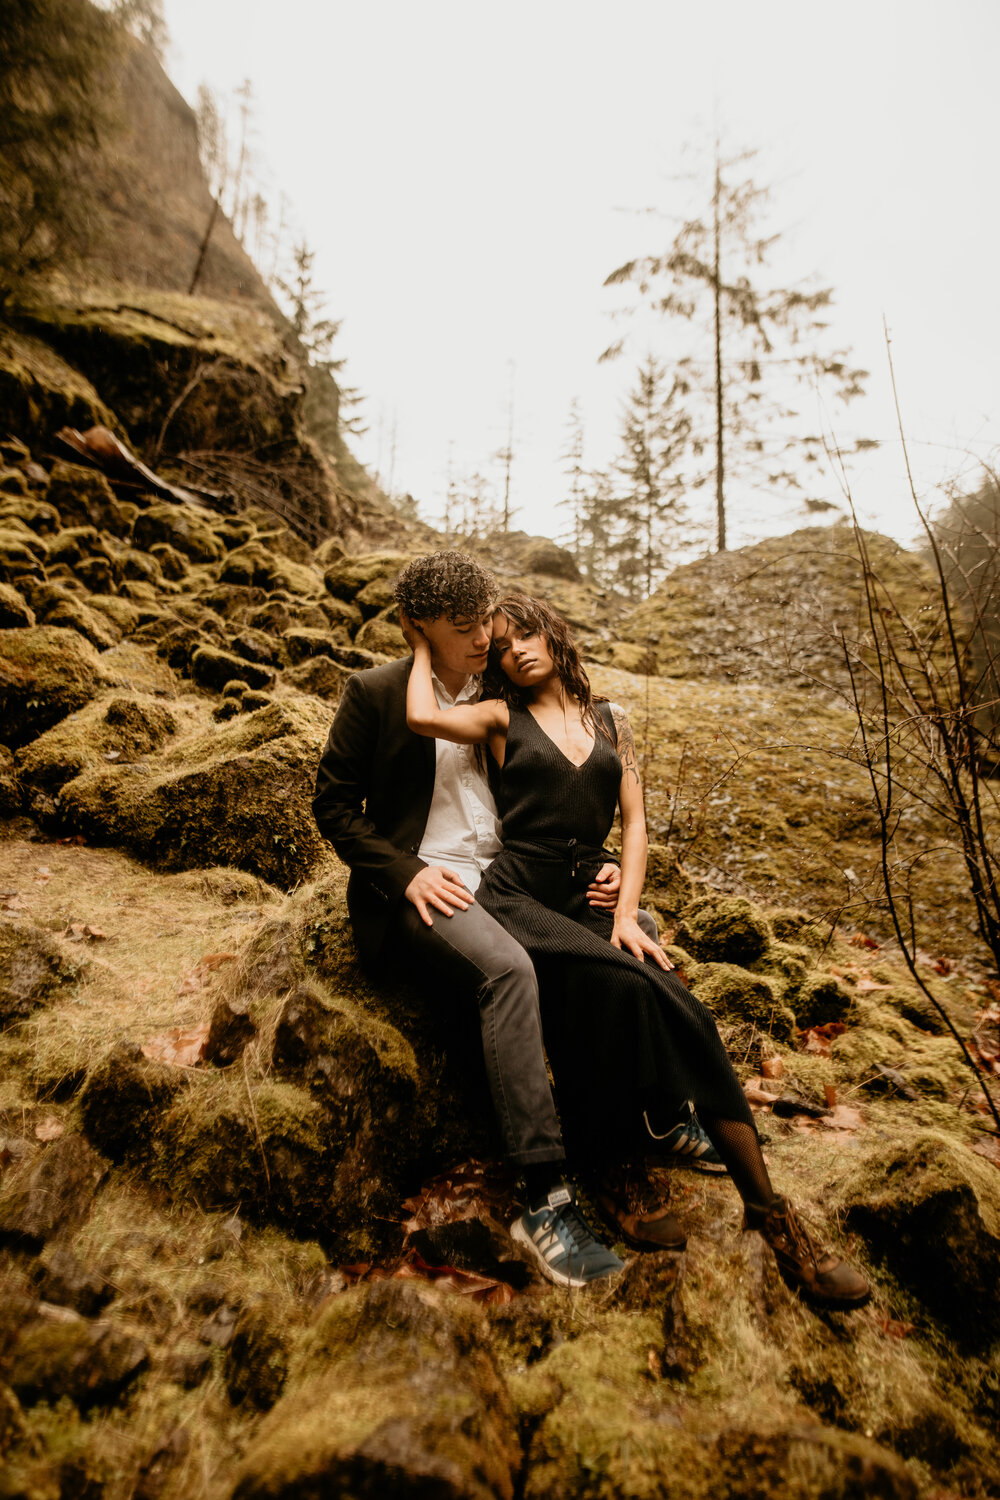 Locations in the US that look like iceland- Iceland elopement- Iceland elopement photographer- Amalfi coast photographer- diablo lake elopement - Seattle elopement photographer - diablo lake photographer - north cascades elopement photographer - Seattle wedding photographer - cute couple - elope instead - breeanna lasher photographer - Iceland lookalike locations&nbsp;